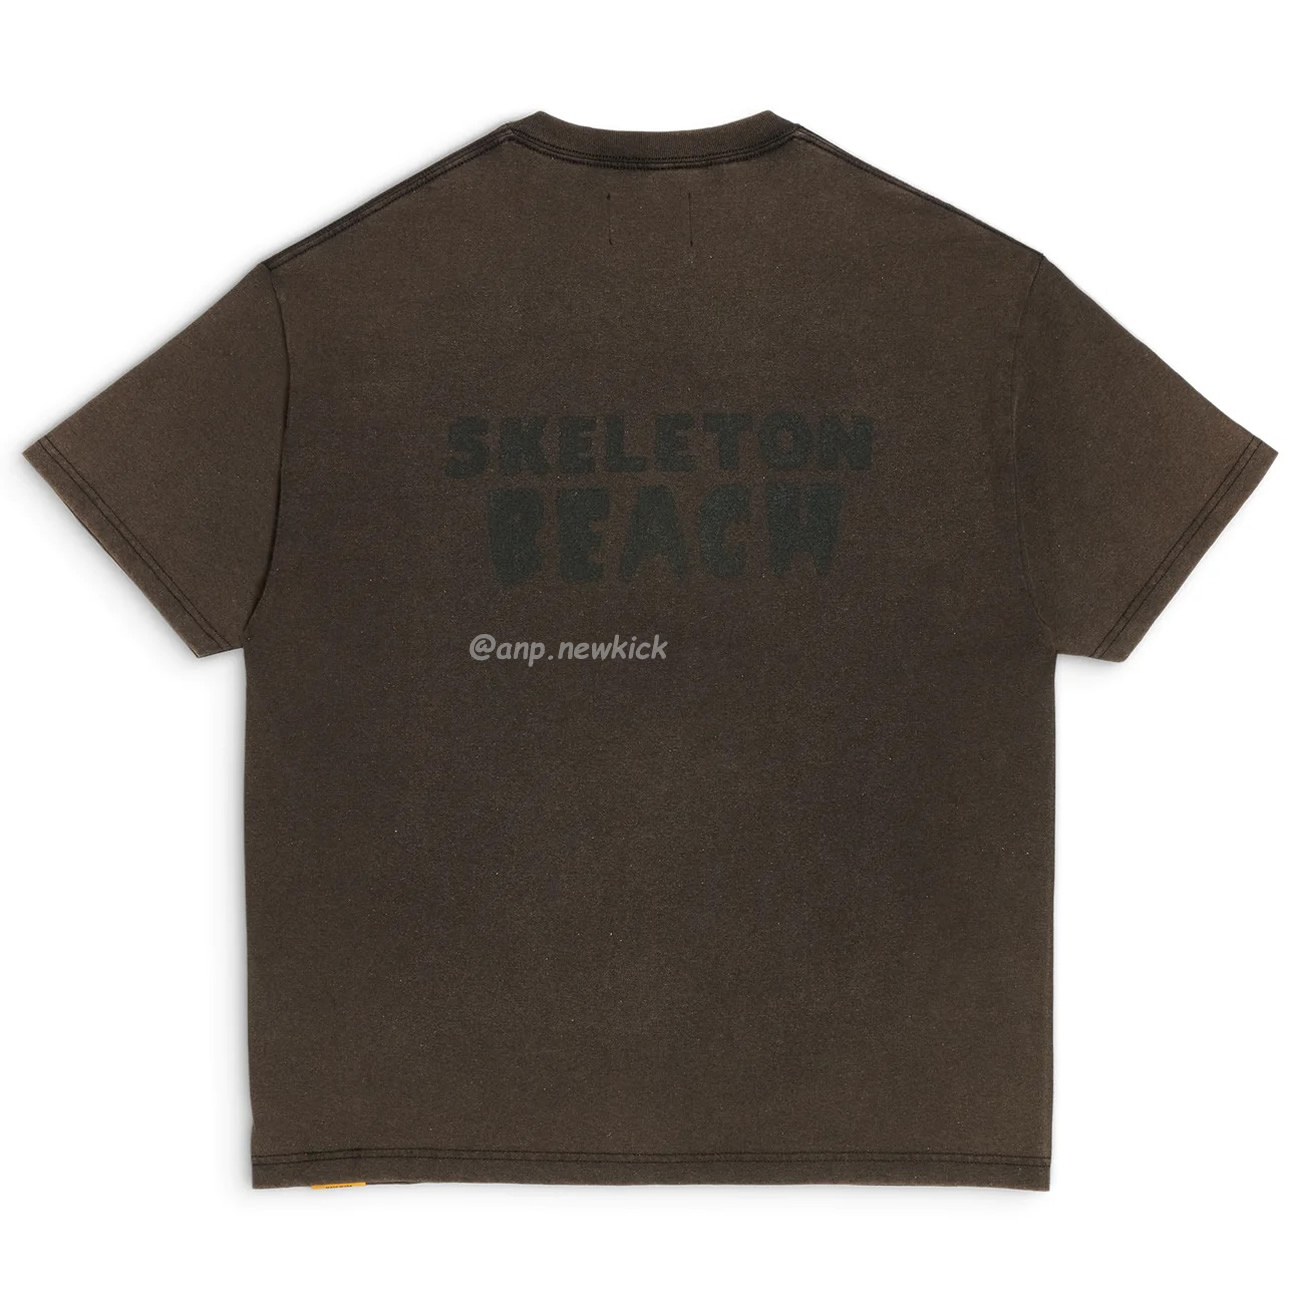 GALLERY DEPT. MUSIC LIVES ON ATK TEE Art Design Exclusive Retro Distressed Washed Short Sleeve T-shirt